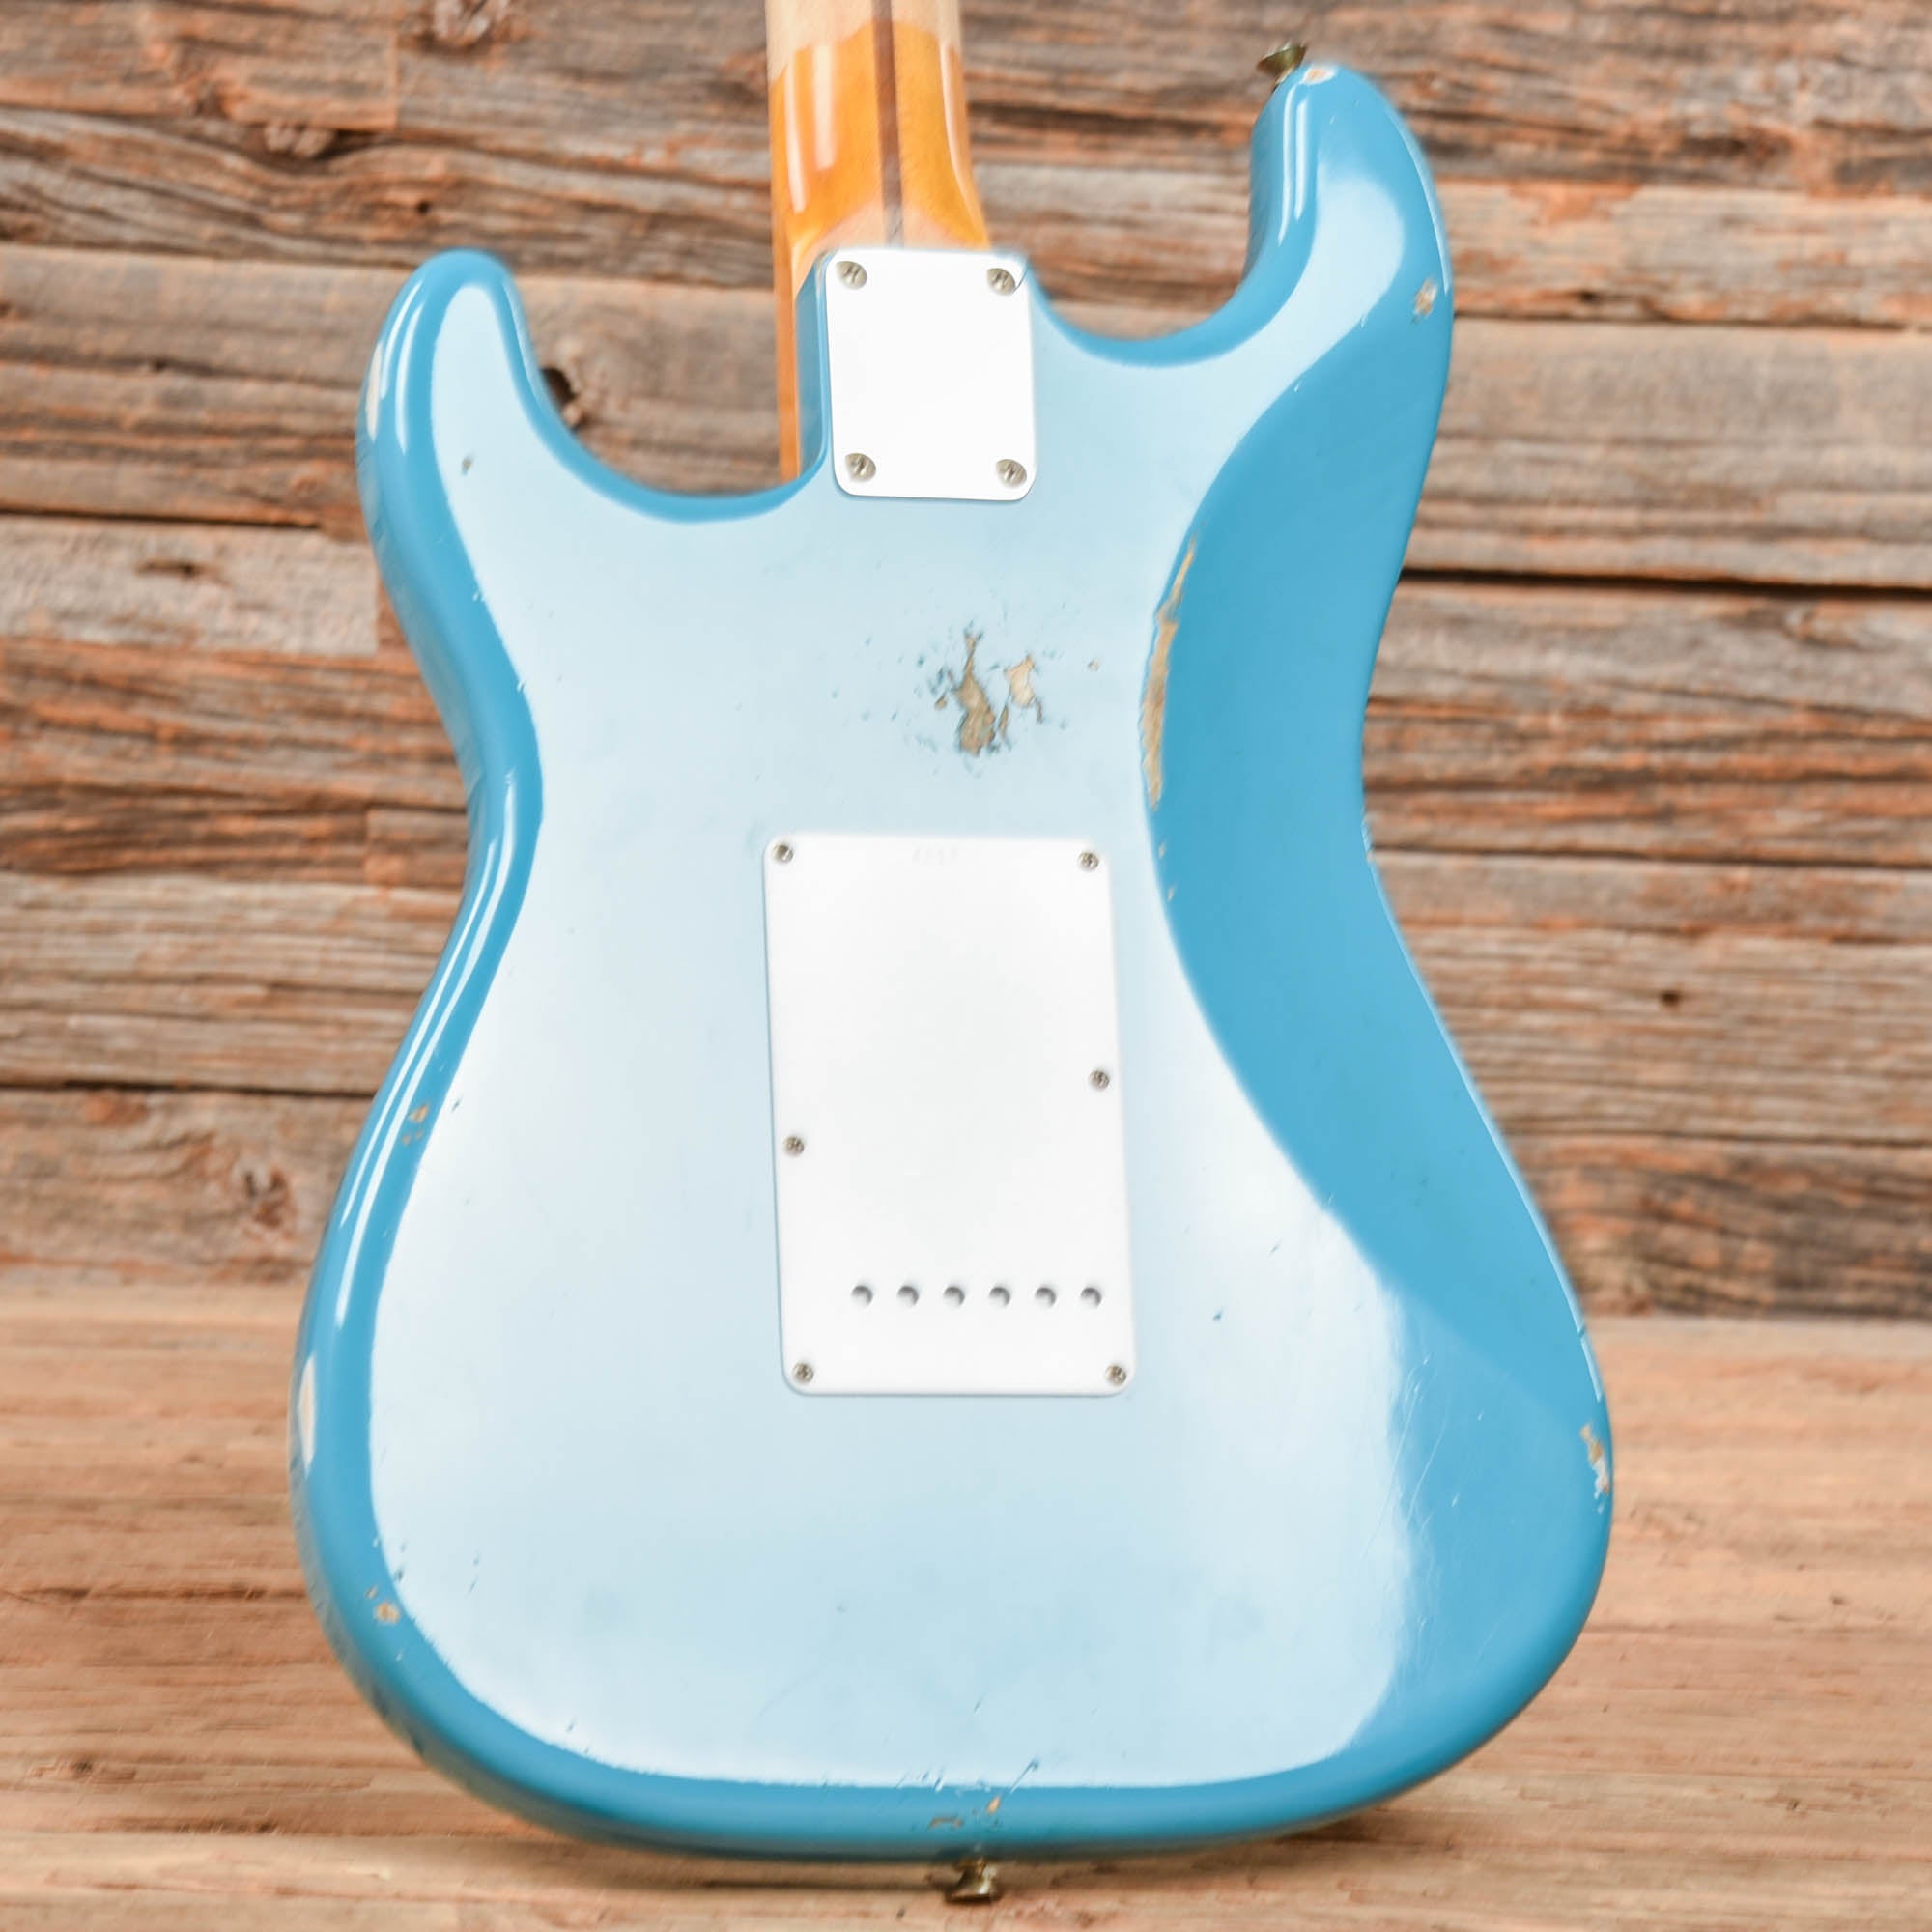 Fender Custom Shop 70th Anniversary '54 Stratocaster Relic Taos Turquois 2023